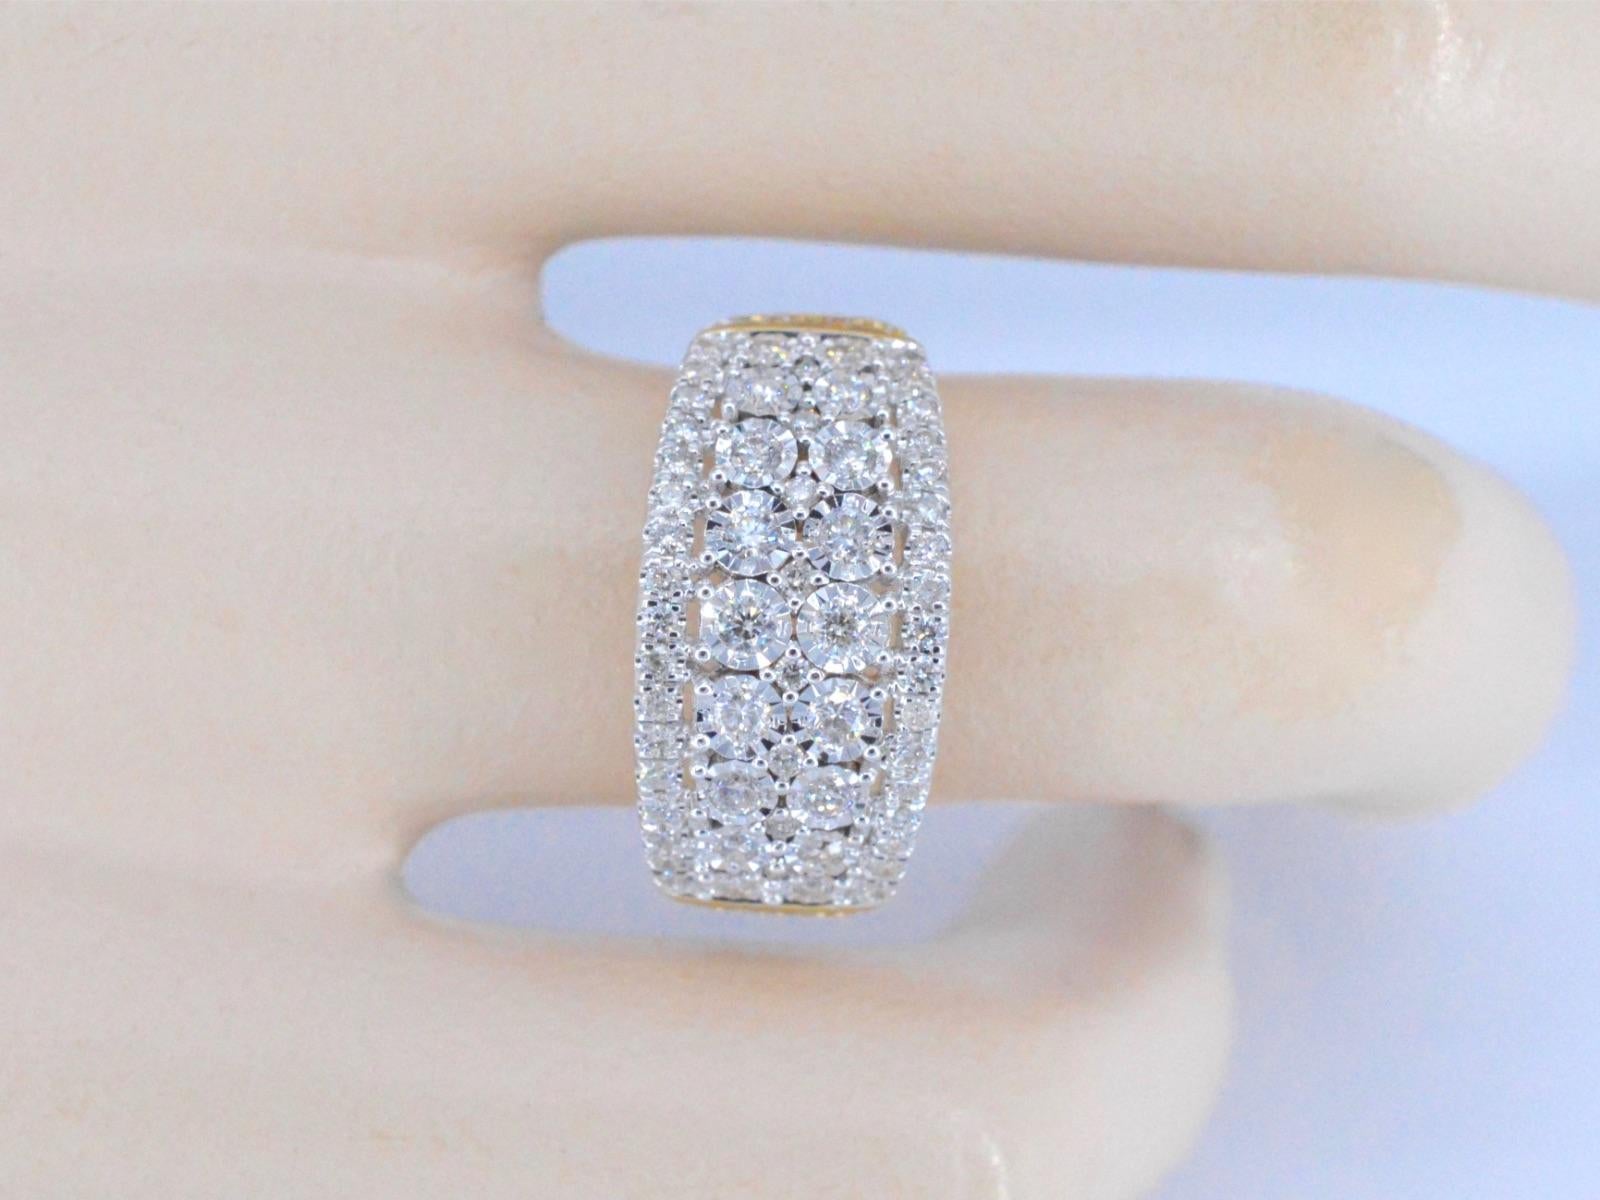 A 14K golden design ring with 1.00 carat of brilliant cut diamonds is a stunning piece of jewelry that exudes luxury and sophistication. The ring features a band made of 14K gold, which is known for its durability and timeless beauty. The design